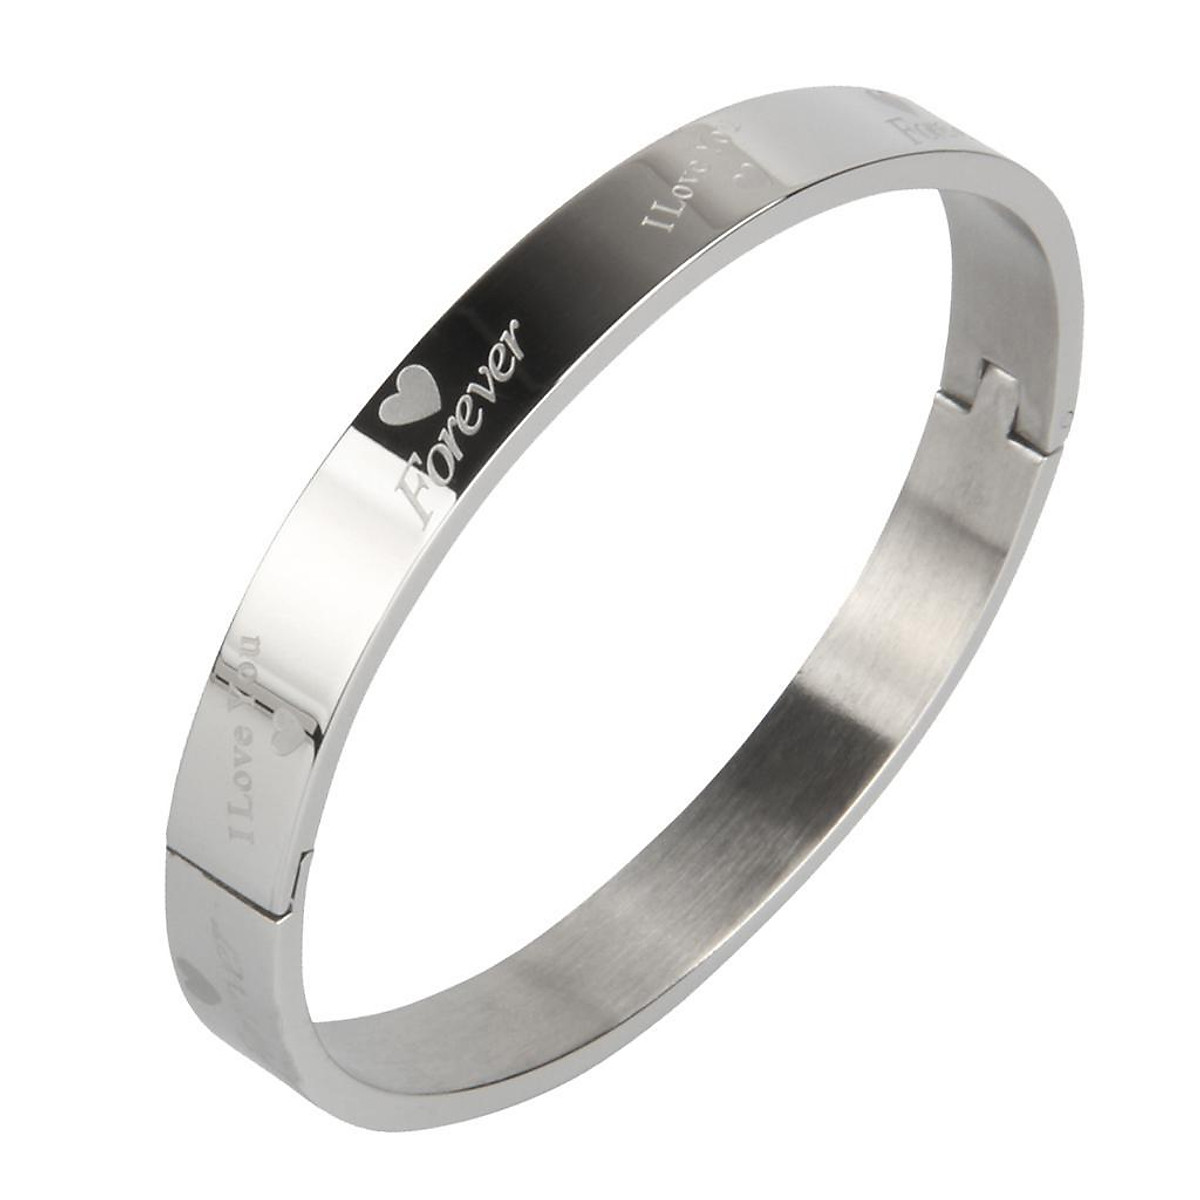 50mm Cuffs Stainless Steel (ringless)